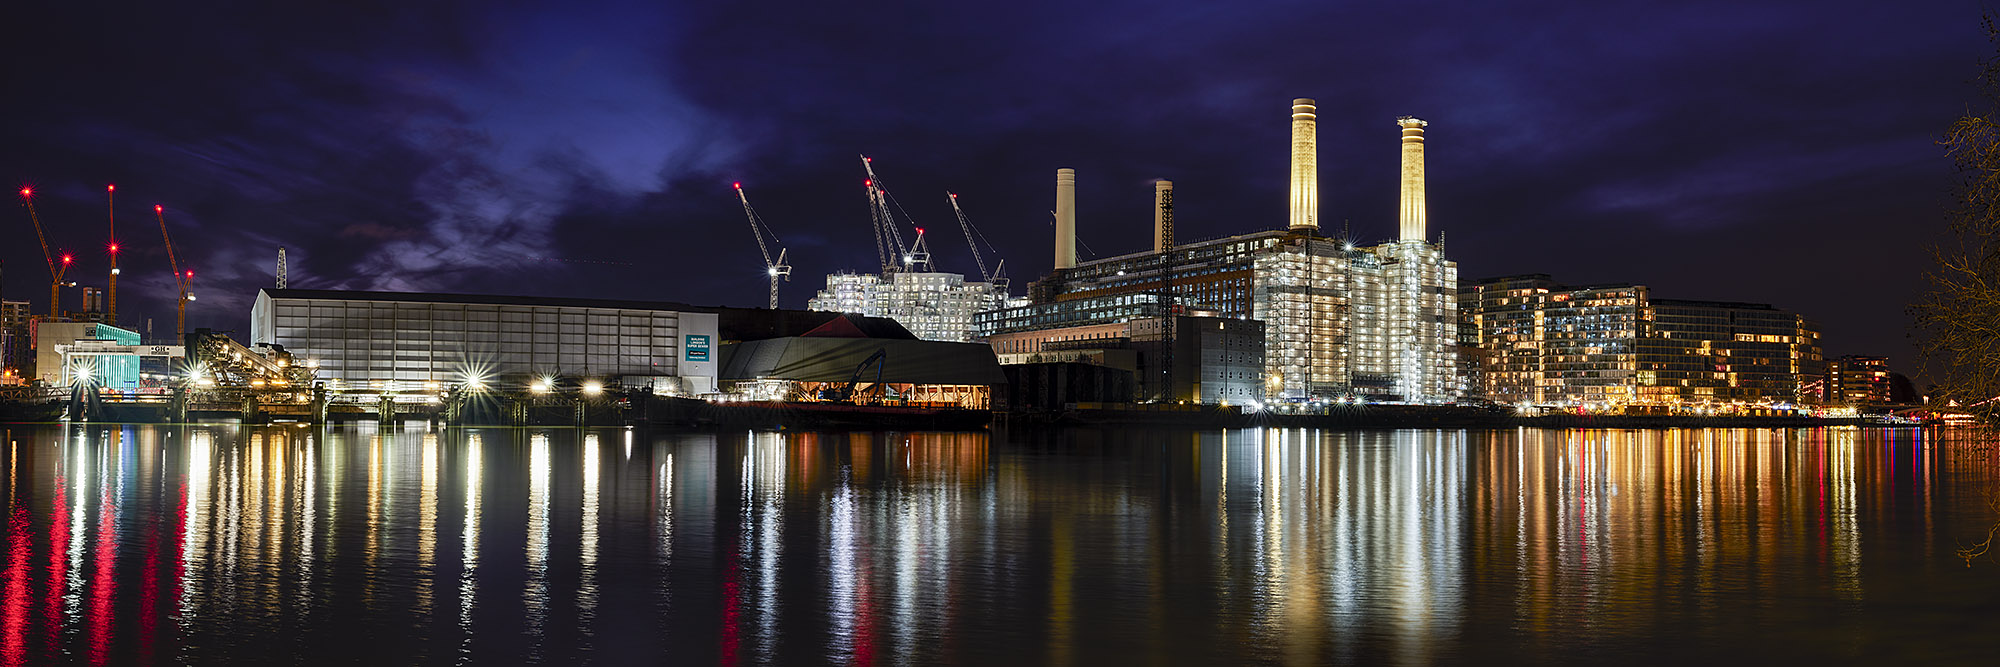 Battersea Power Station Transformation a Blog from Mr Smith World